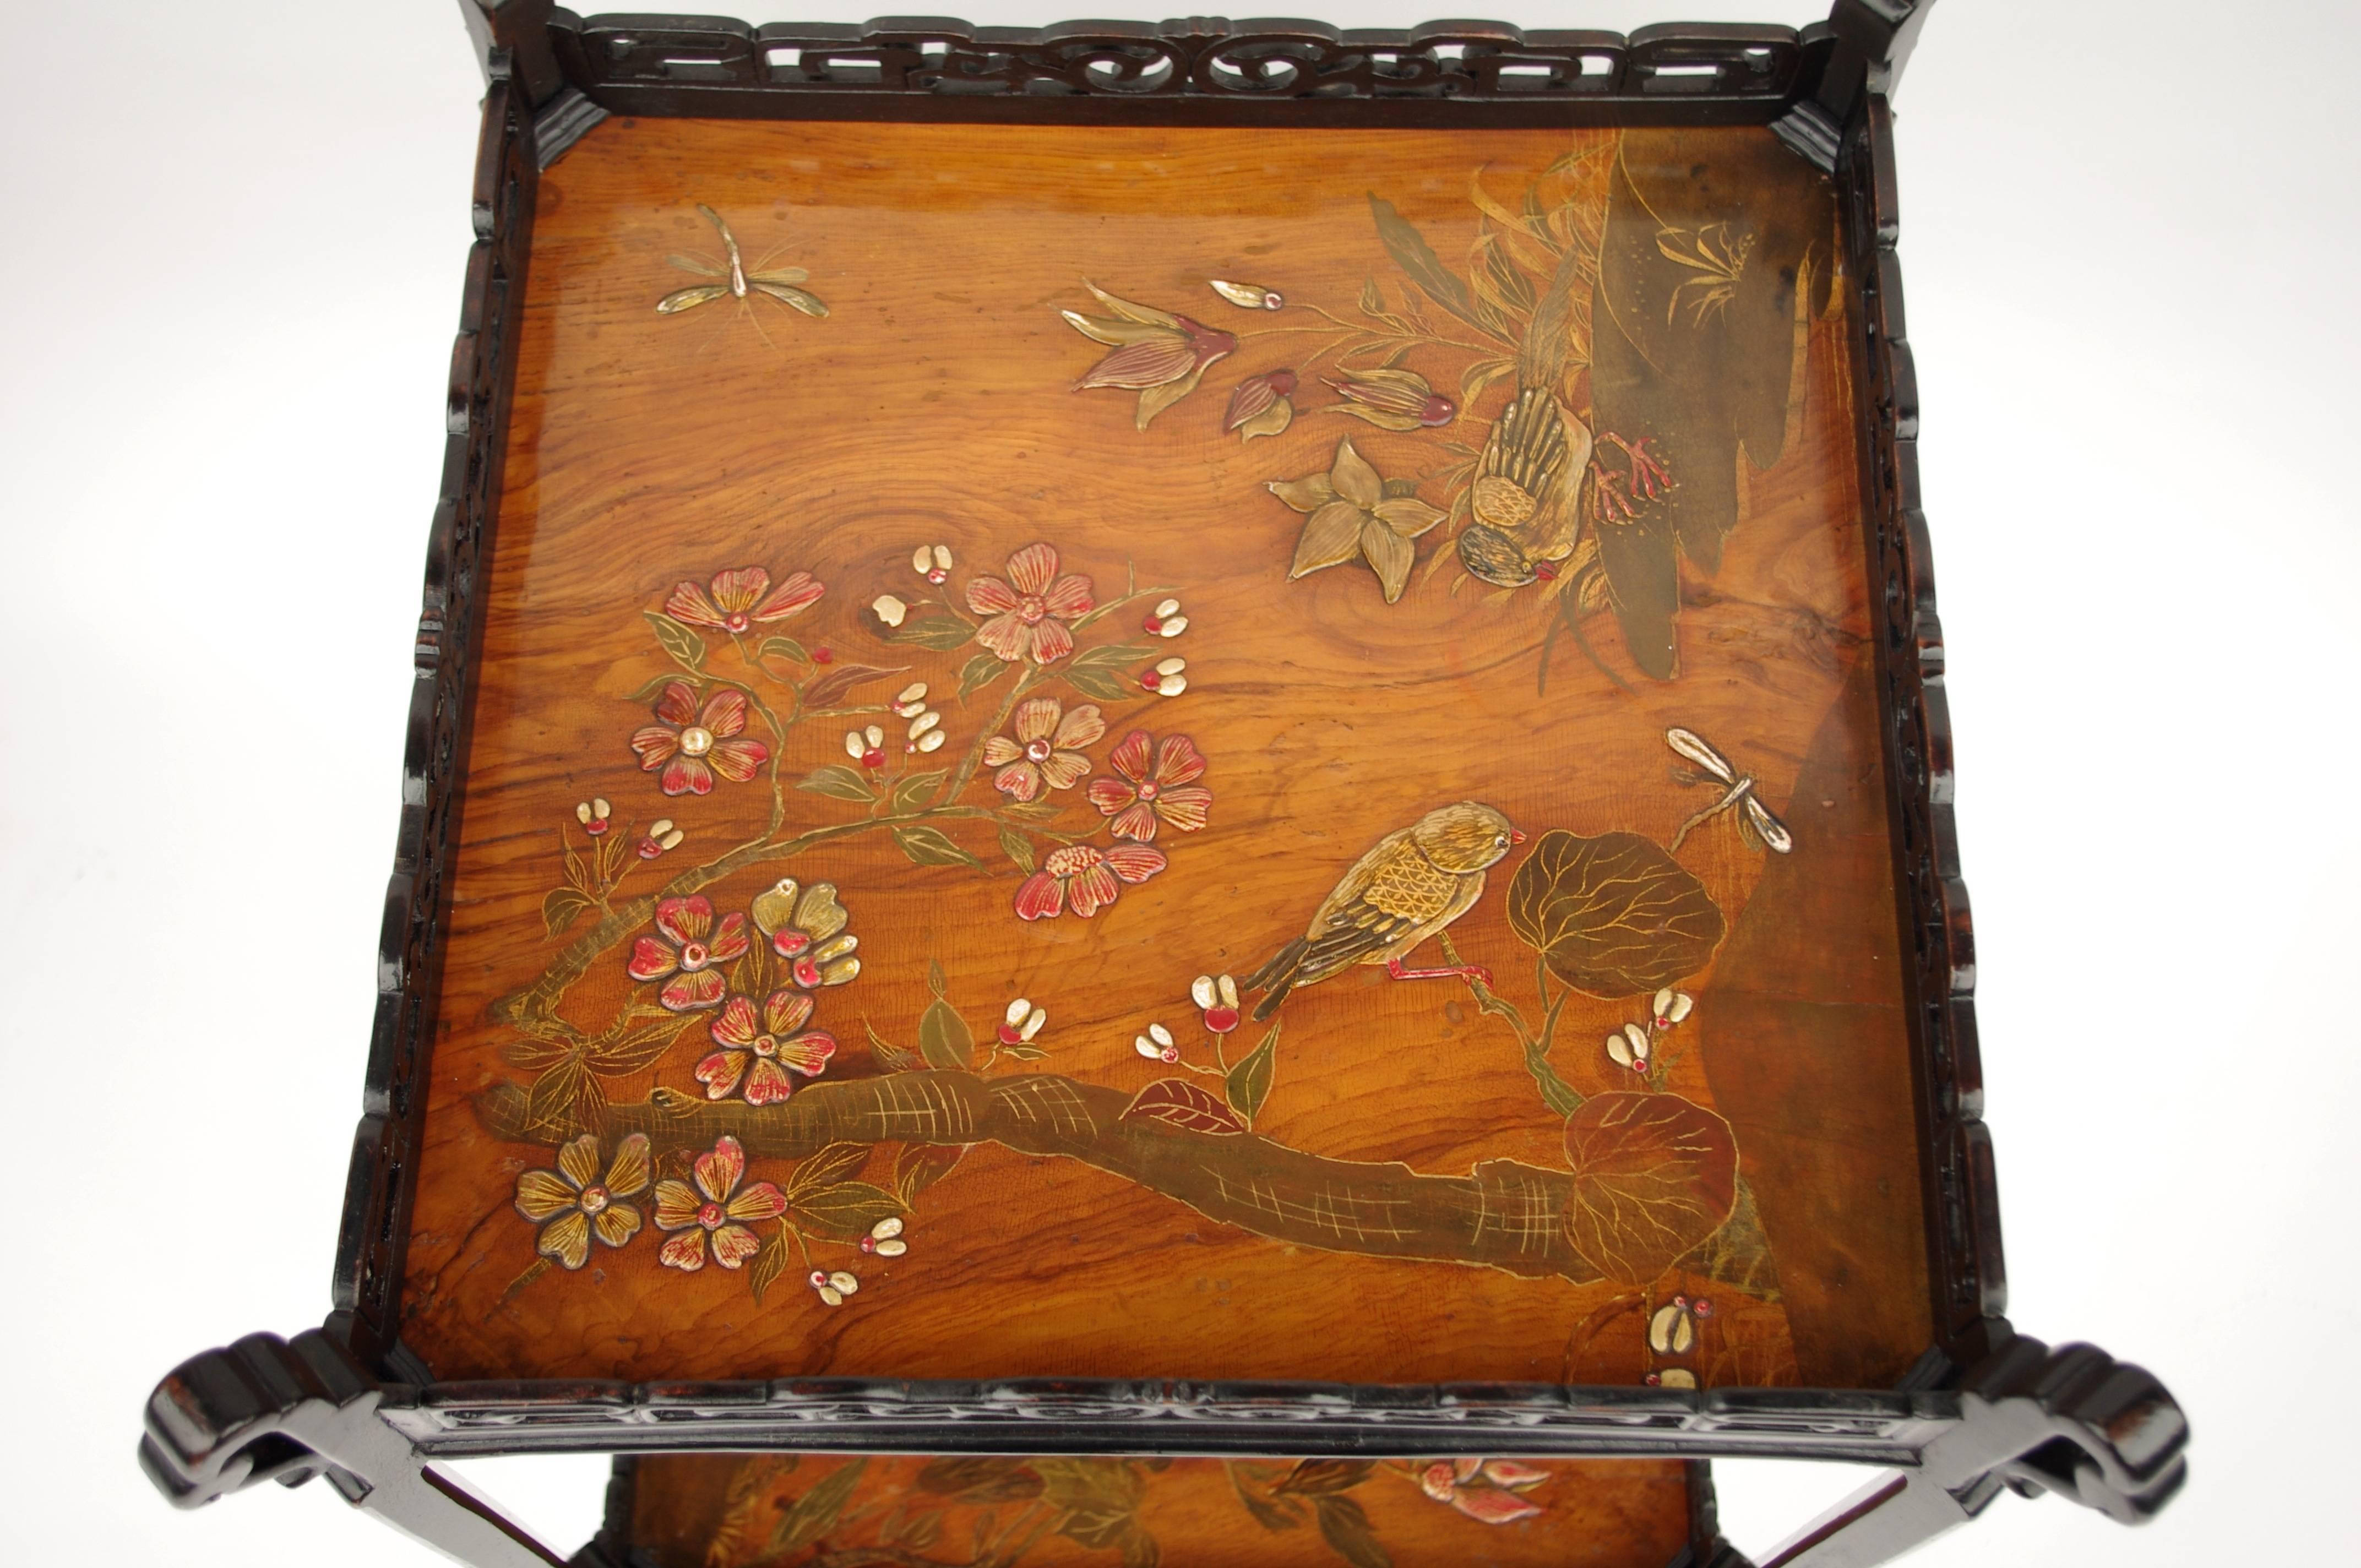 Late 19th Century Side Table Chinese Lacquer Decor Table from the 19th Century